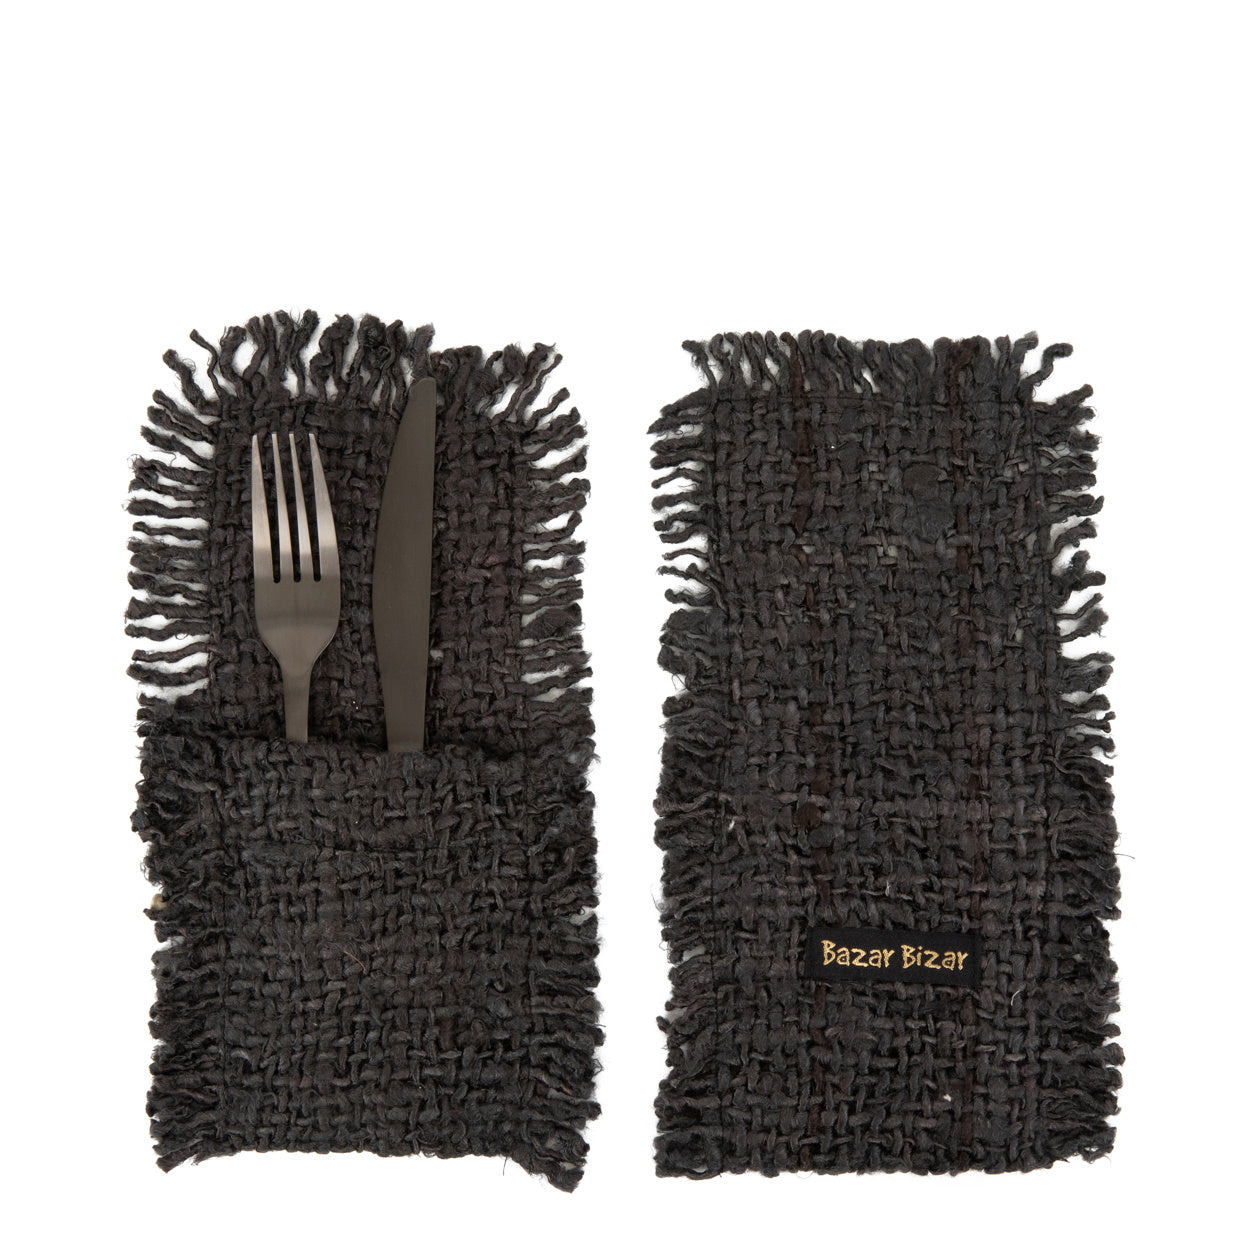 THE OH MY GEE Cutlery Holder Set of 4 black navy